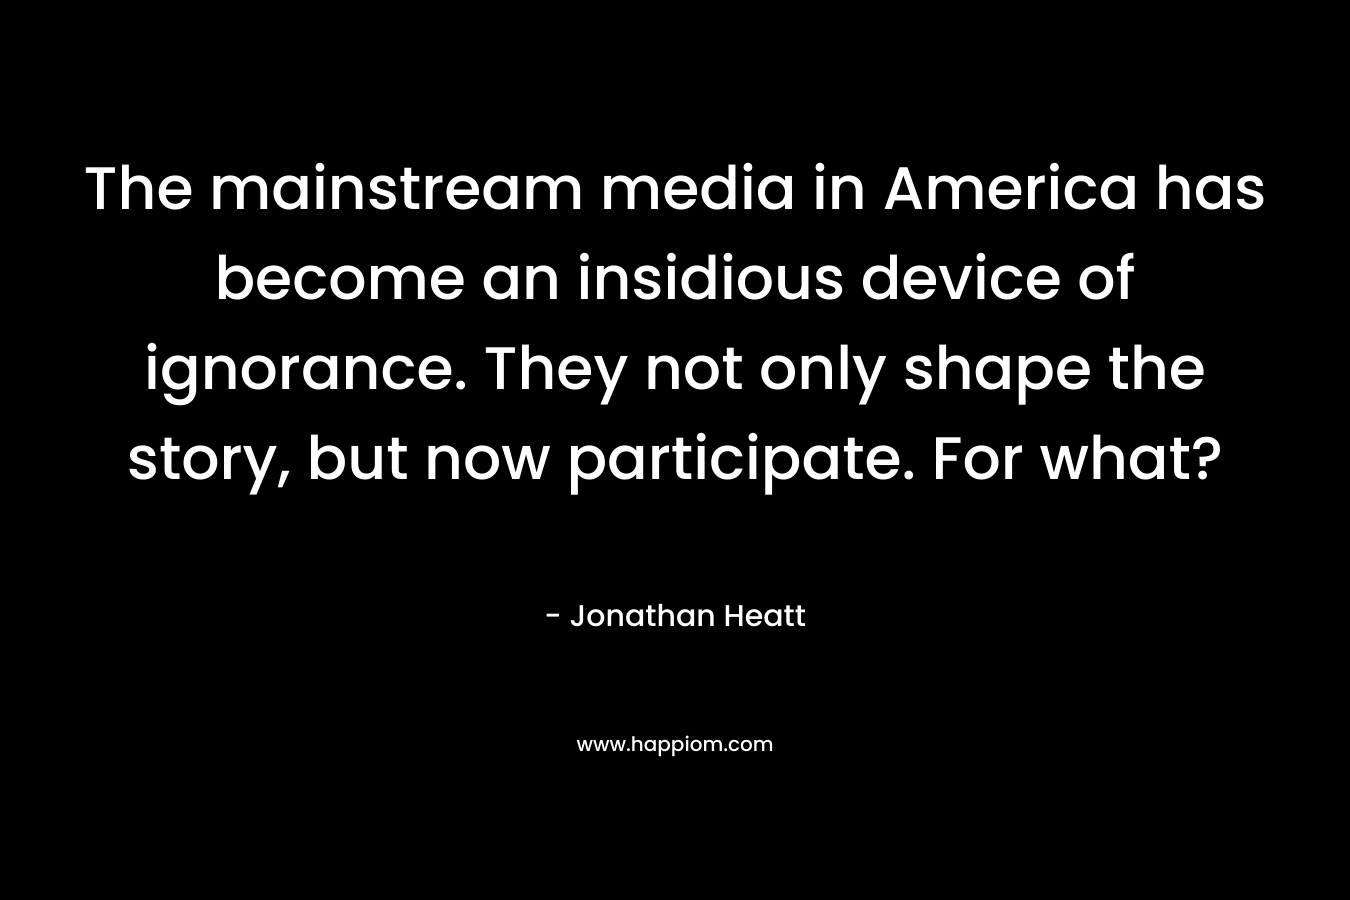 The mainstream media in America has become an insidious device of ignorance. They not only shape the story, but now participate. For what? – Jonathan Heatt